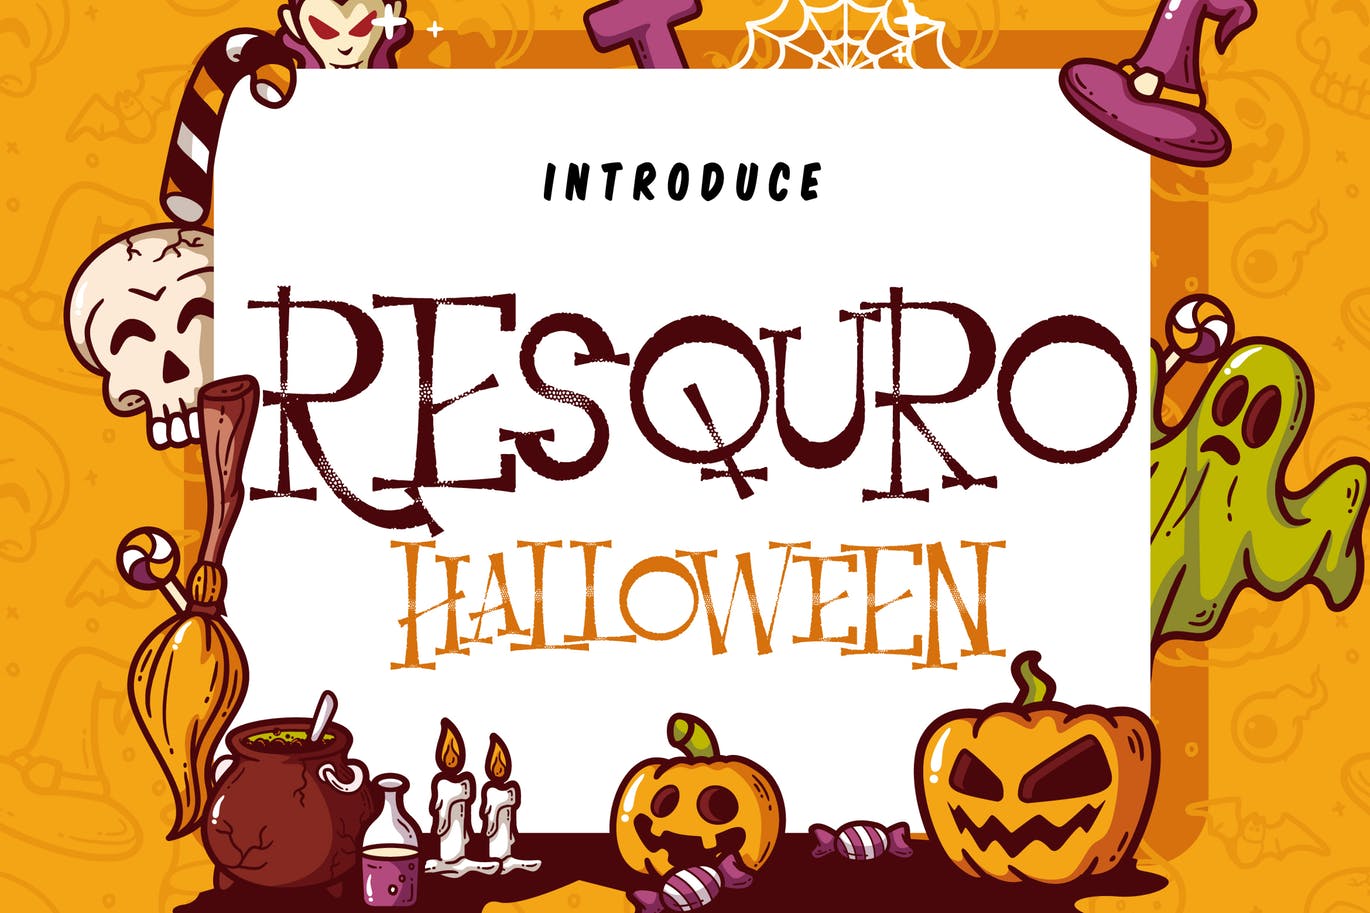 A decorative font for halloween